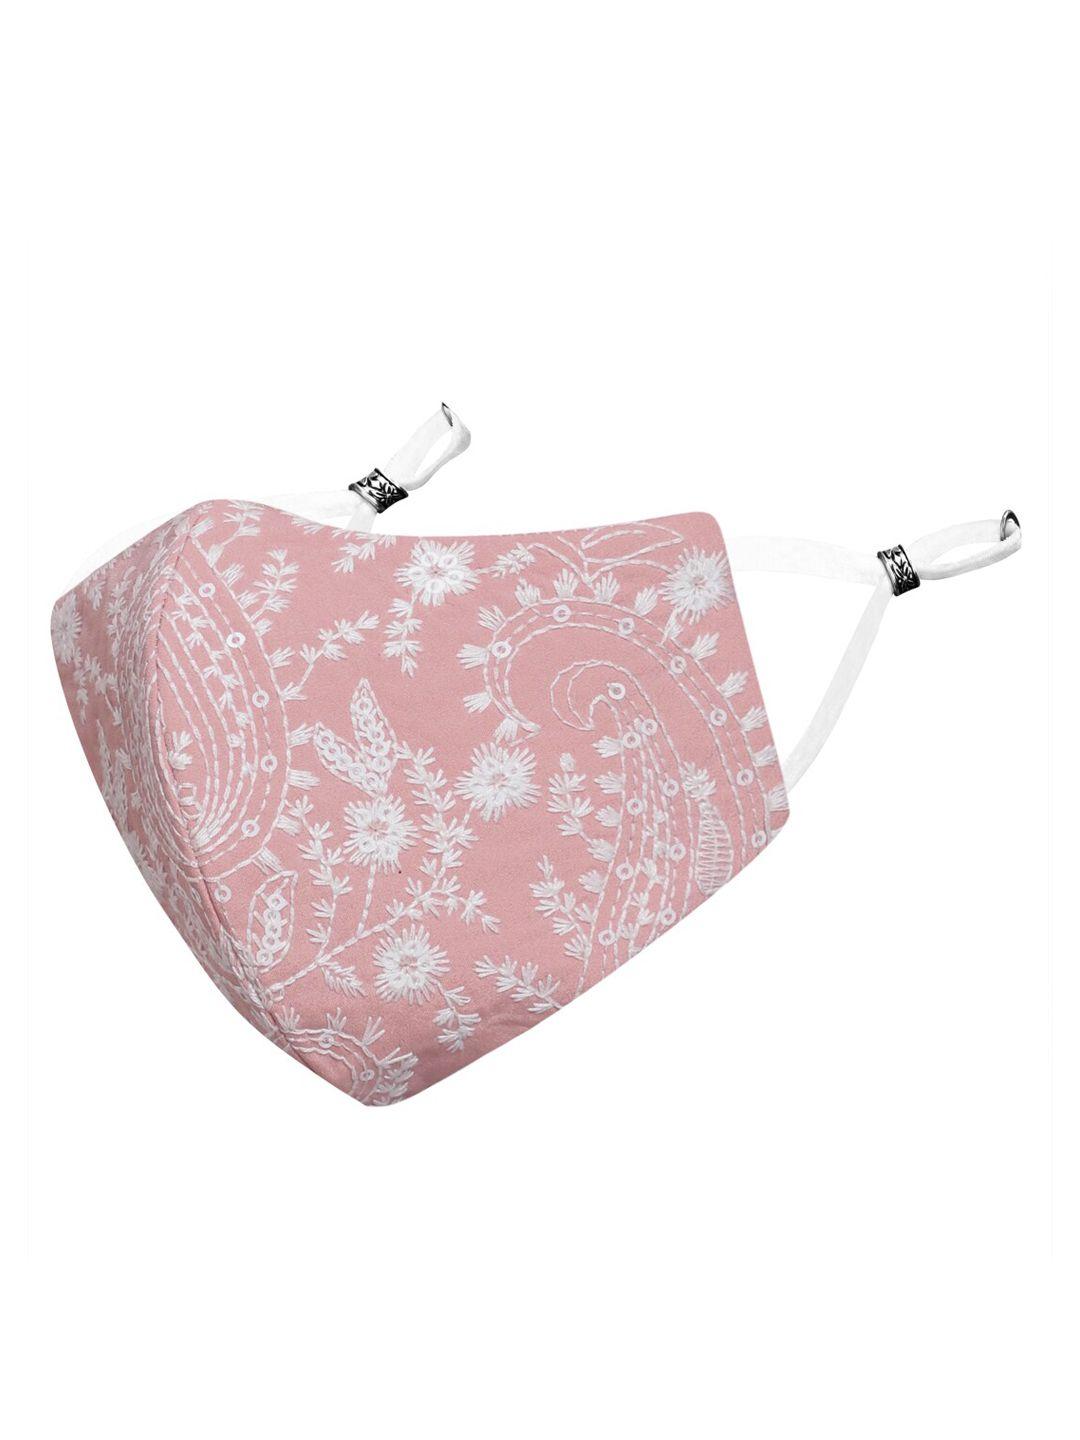 MASQ Pink & White Embroidered 4-Ply Reusable Anti-Pollution Cloth Mask